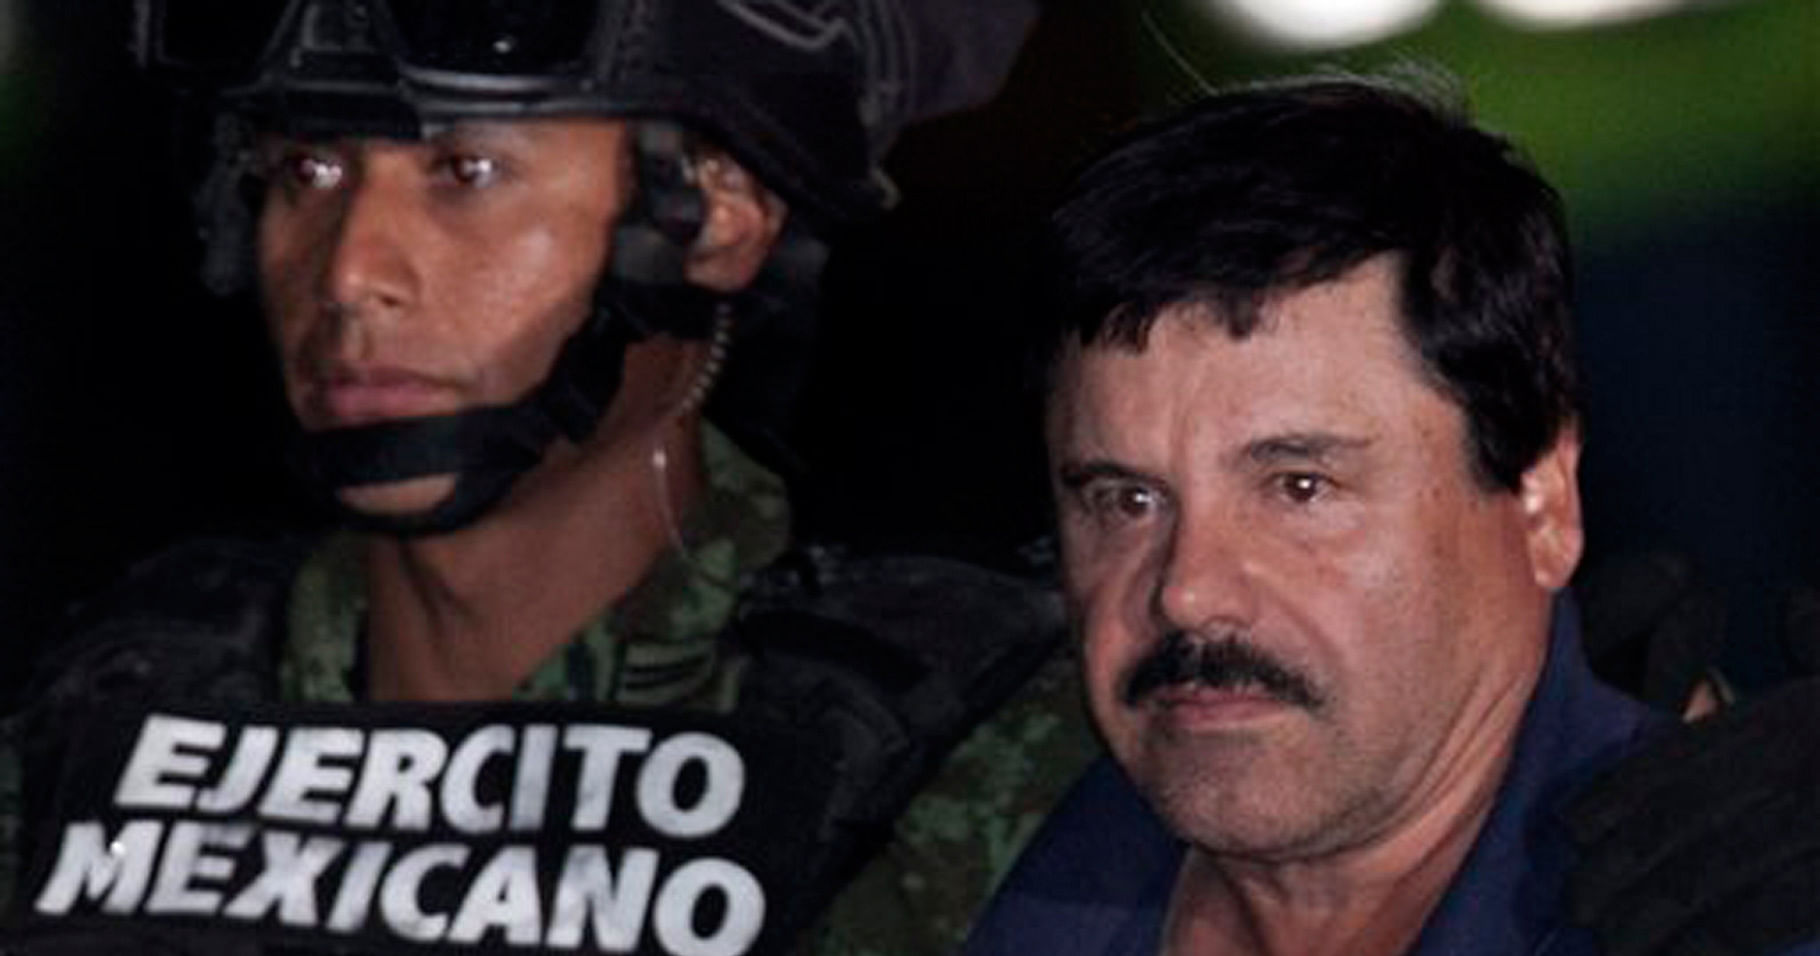 Mexican Drug Lord El Chapo's Hollywood Dream Brought Him Down